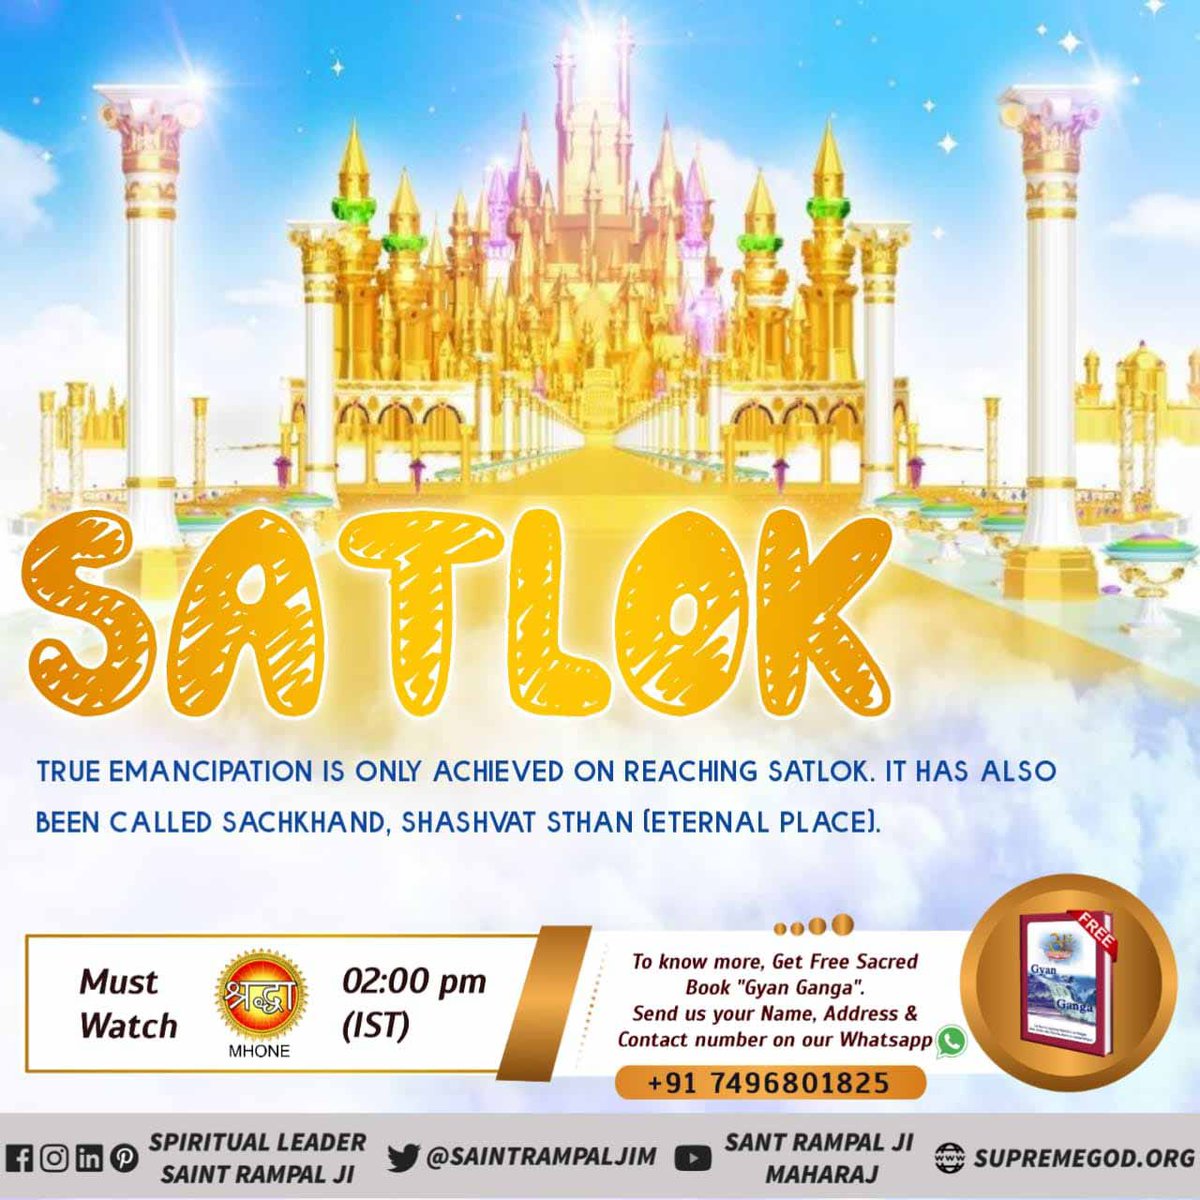 #KaalLok_Vs_Satlok In Kaal Lok / Prithvi Lok, the creature suffers only what it has done. There is no scarcity in Satlok. Everything is met by the quota of God and that is why there is no attachment or hatred there. Everyone lives together in love and praises God,